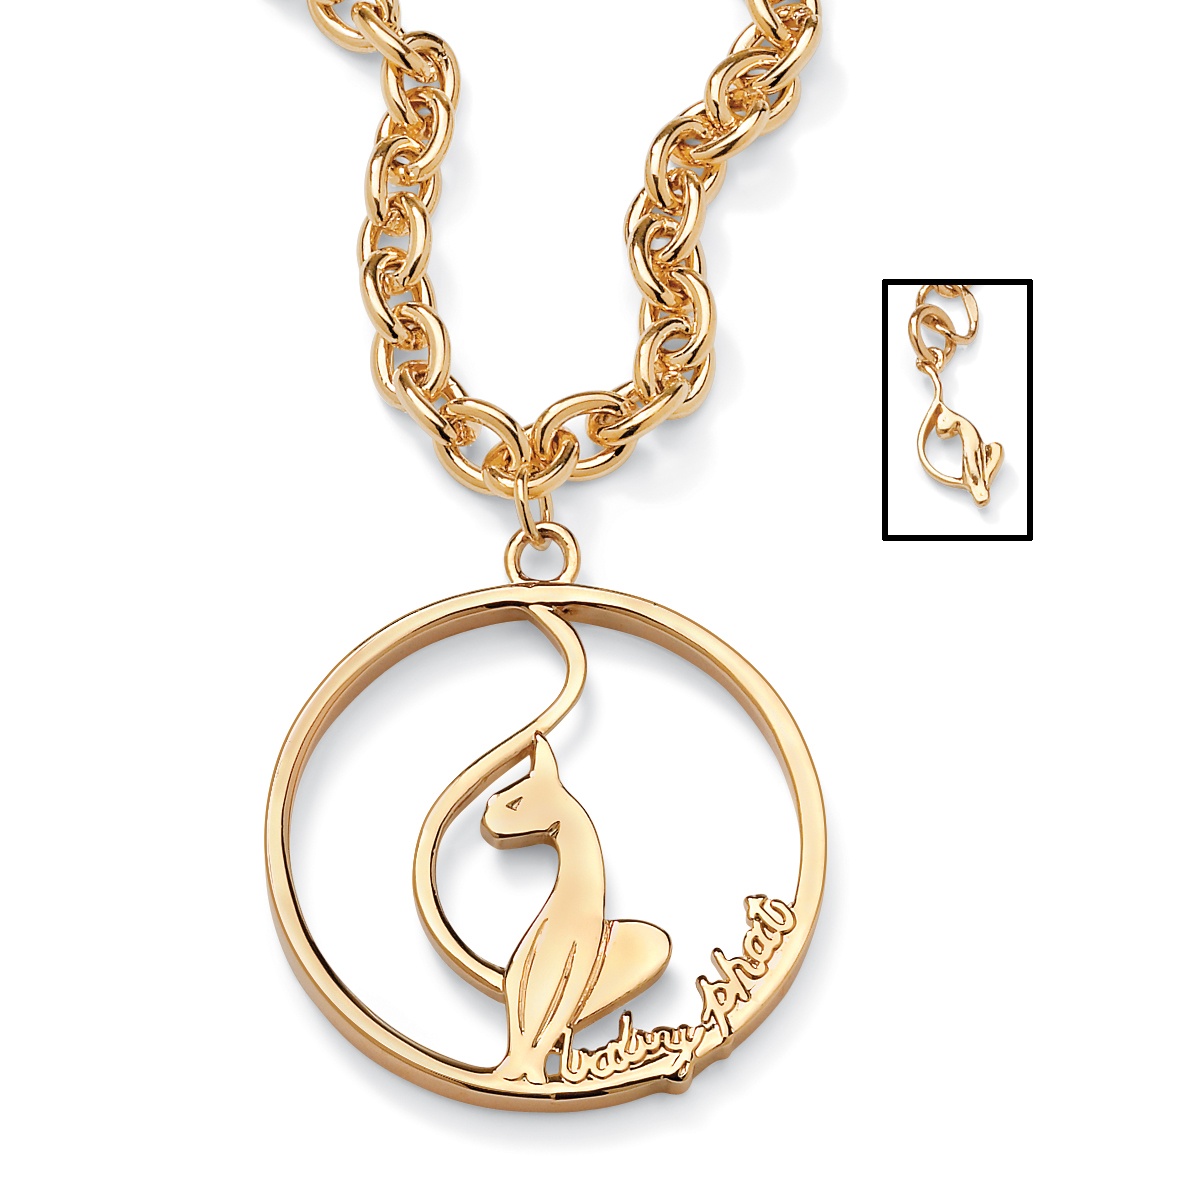 Price.1 k Gold Plated Textured Circle Disk Necklace and Pierced Earring Set 